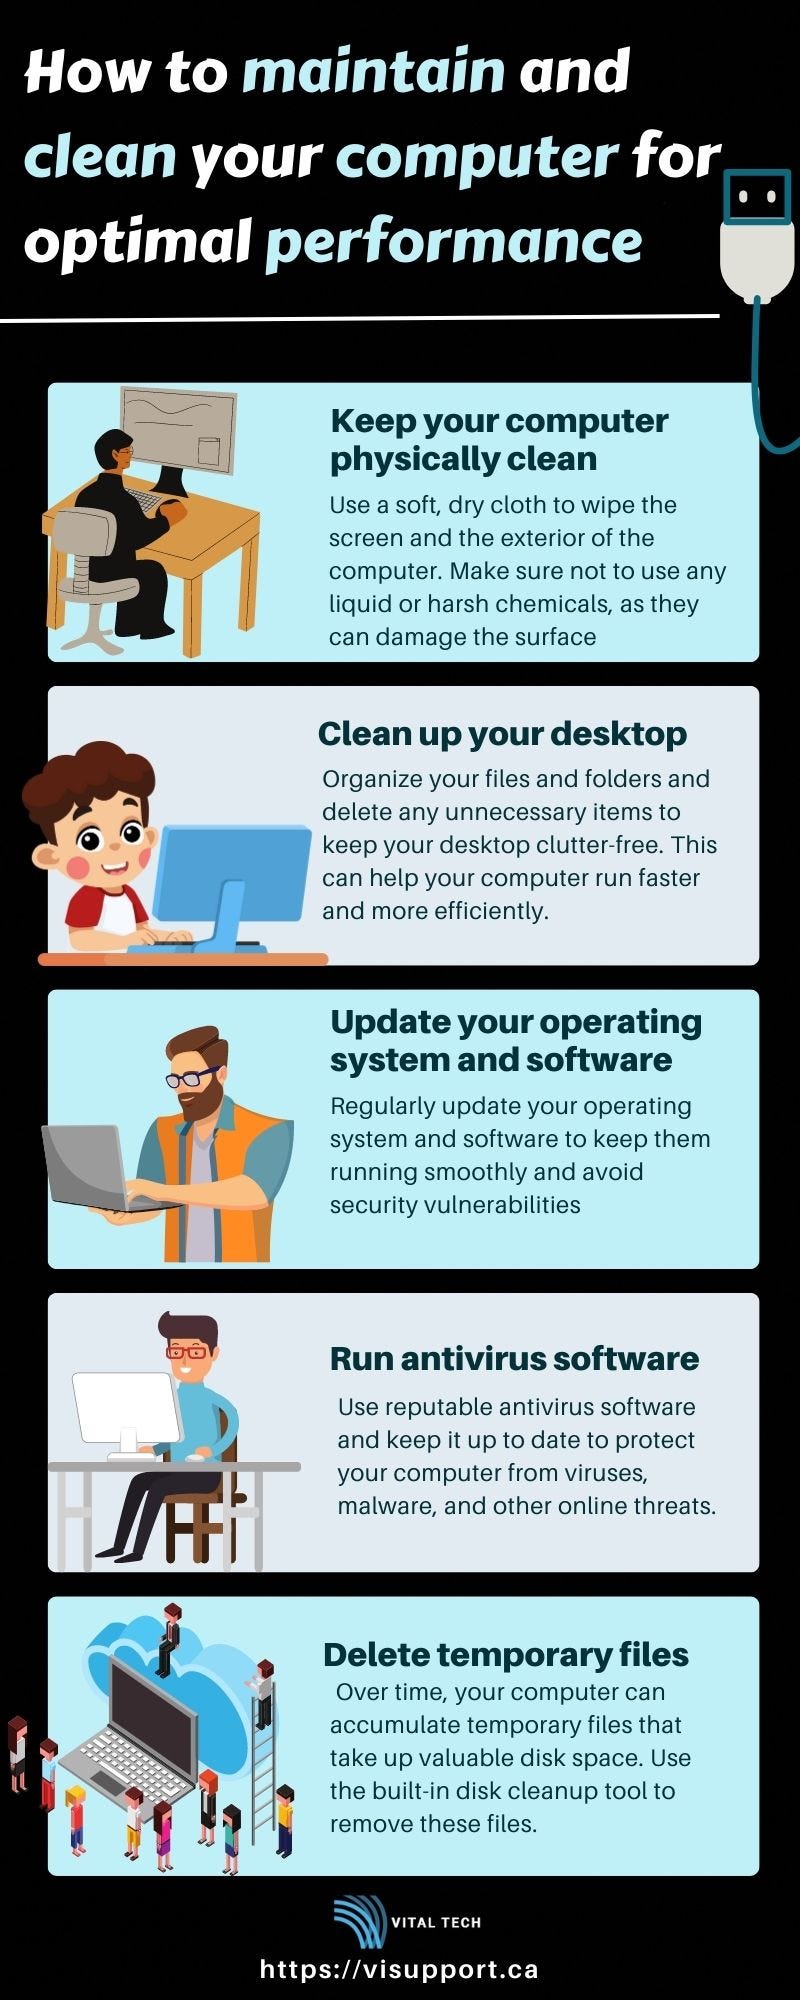 How to maintain and clean your computer for optimal performance